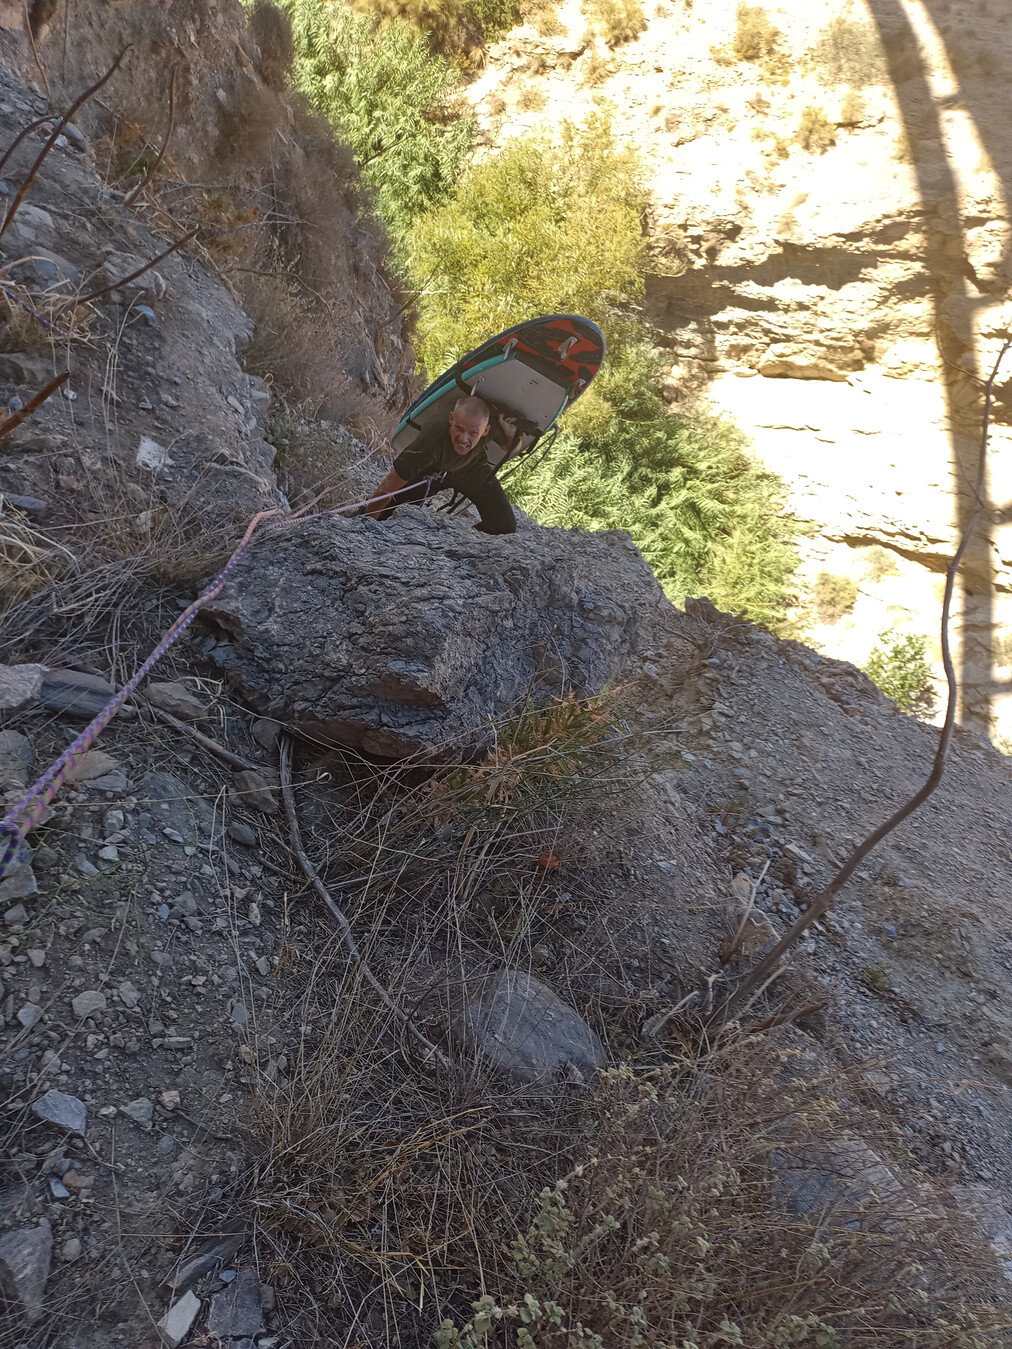 Ropes belay a person on a steep slope carrying surfboards